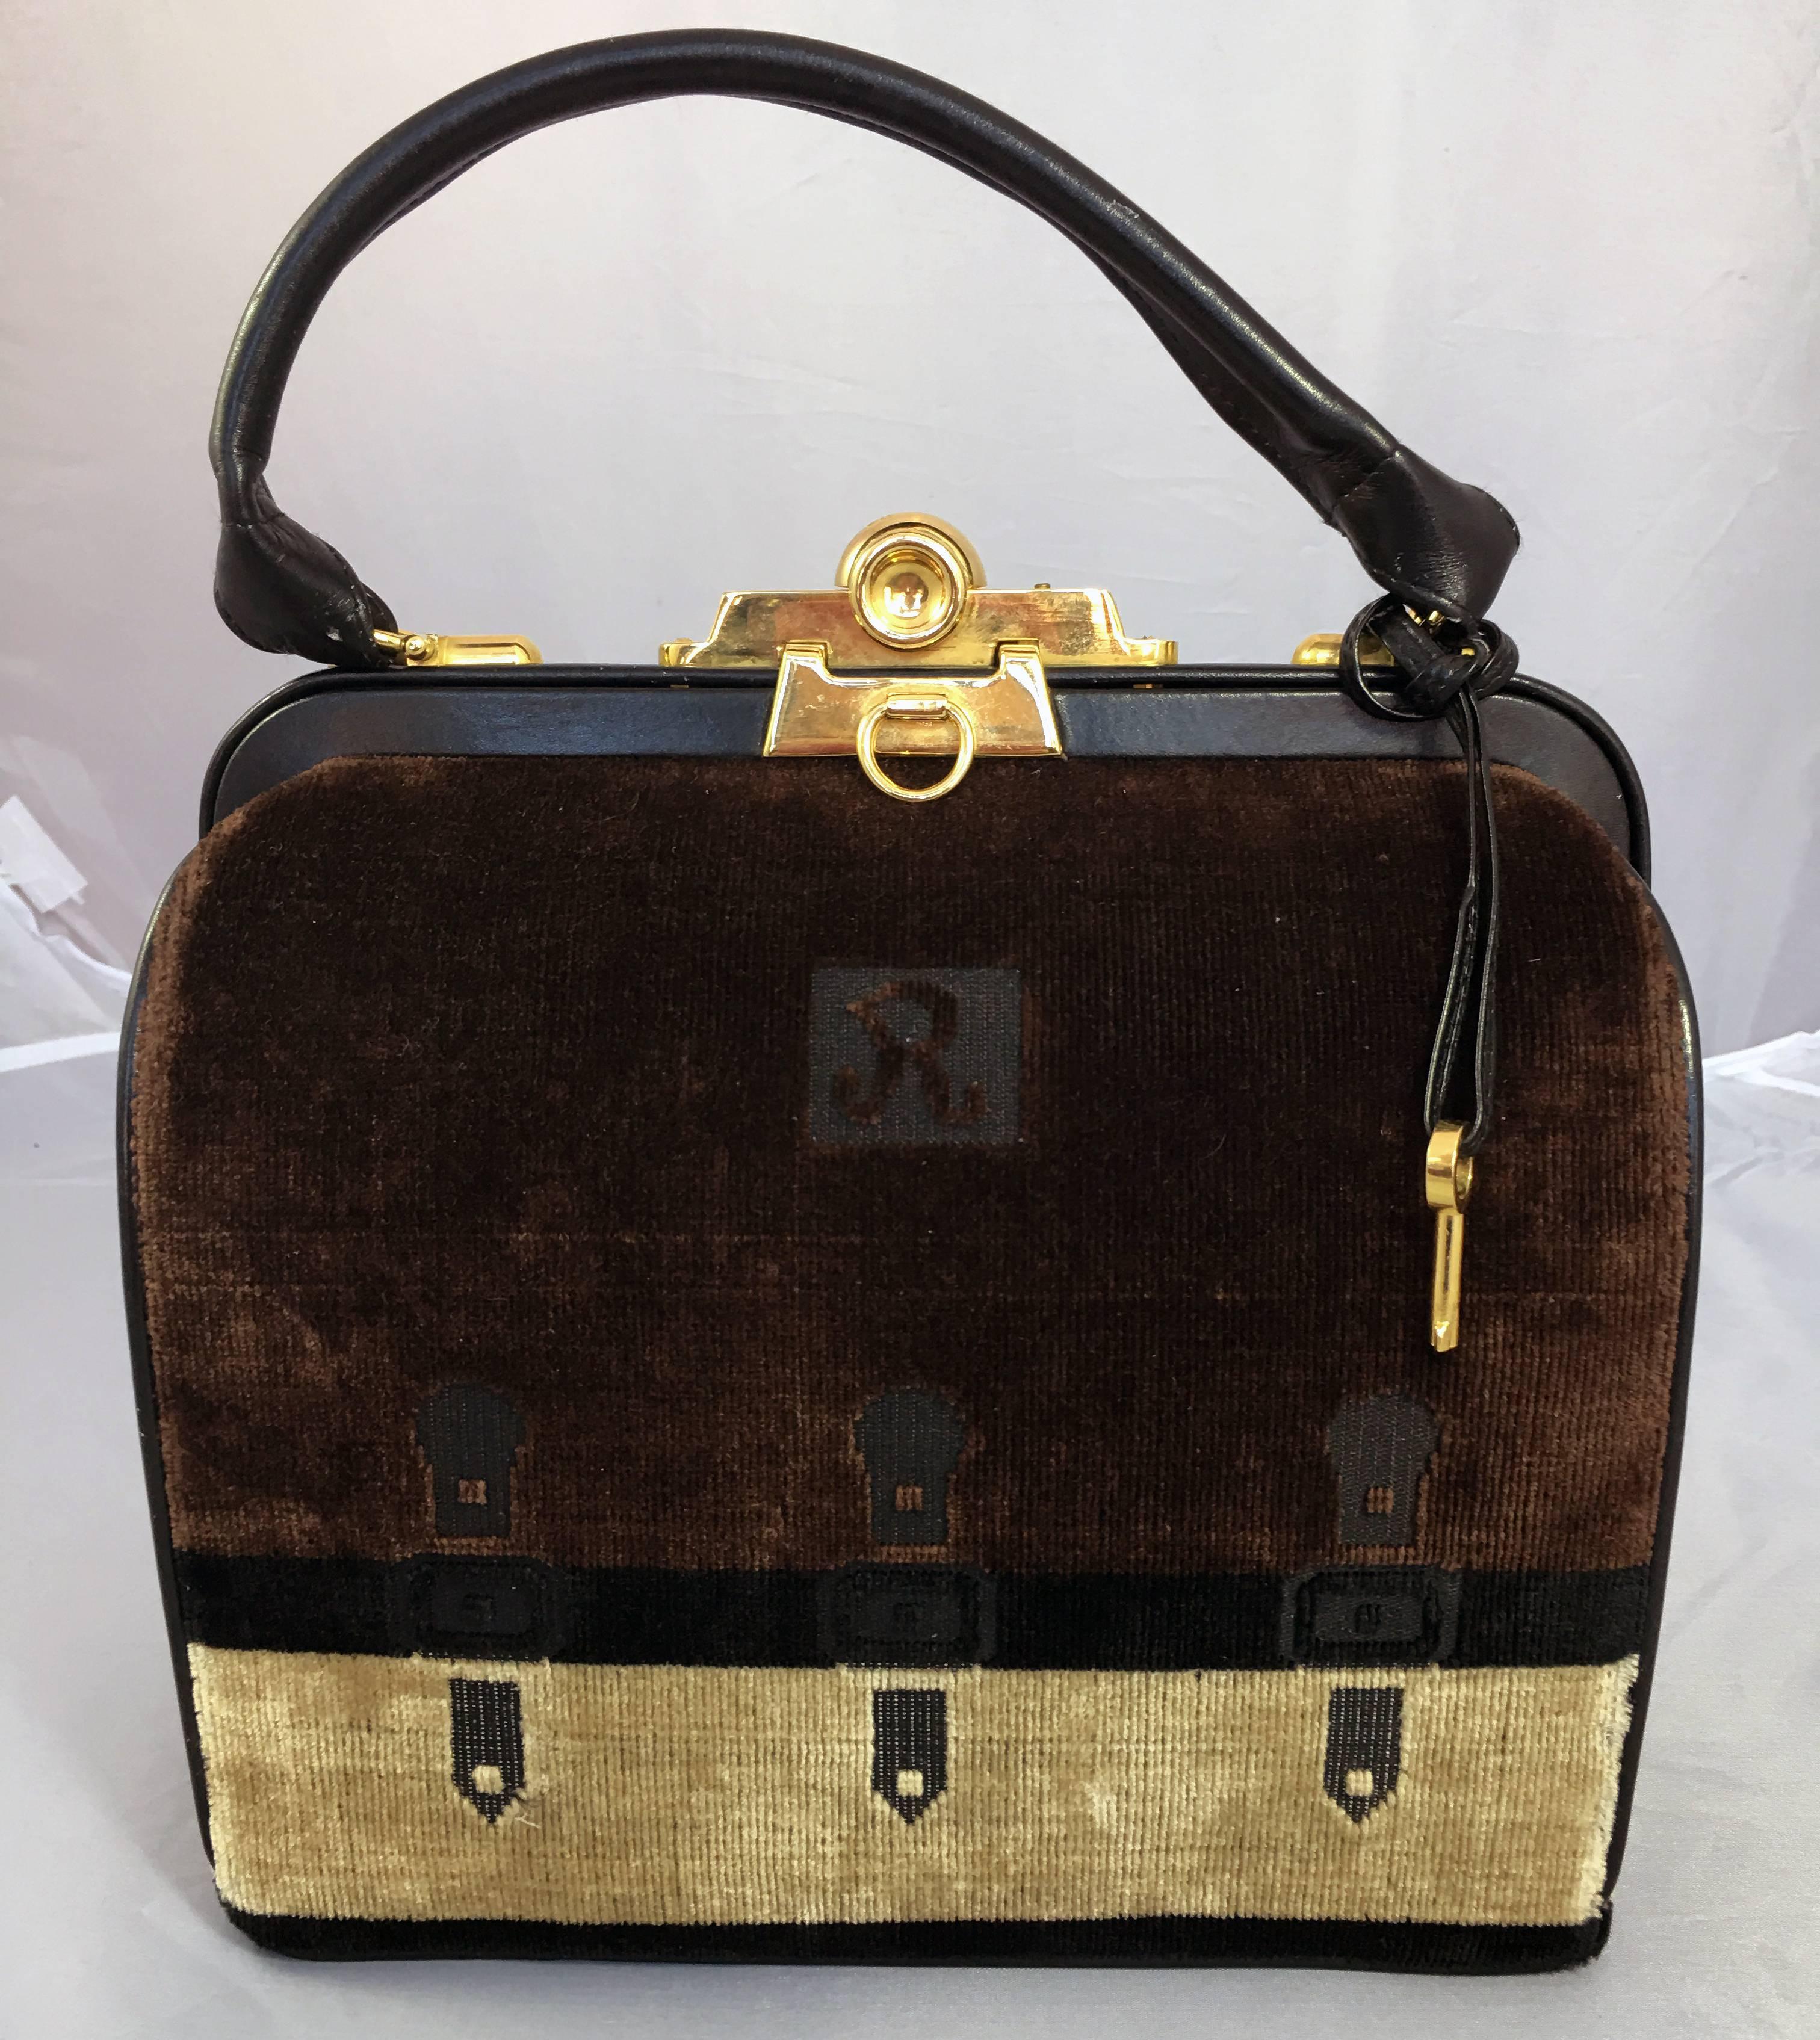 Roberta di Camerino Handbag with two tone chocolate abd cream colored Velvet  and black leather interior. The top features structured locking closure complete with original Key.

Circa 1960
Made in Italy

Measurements:
11.5